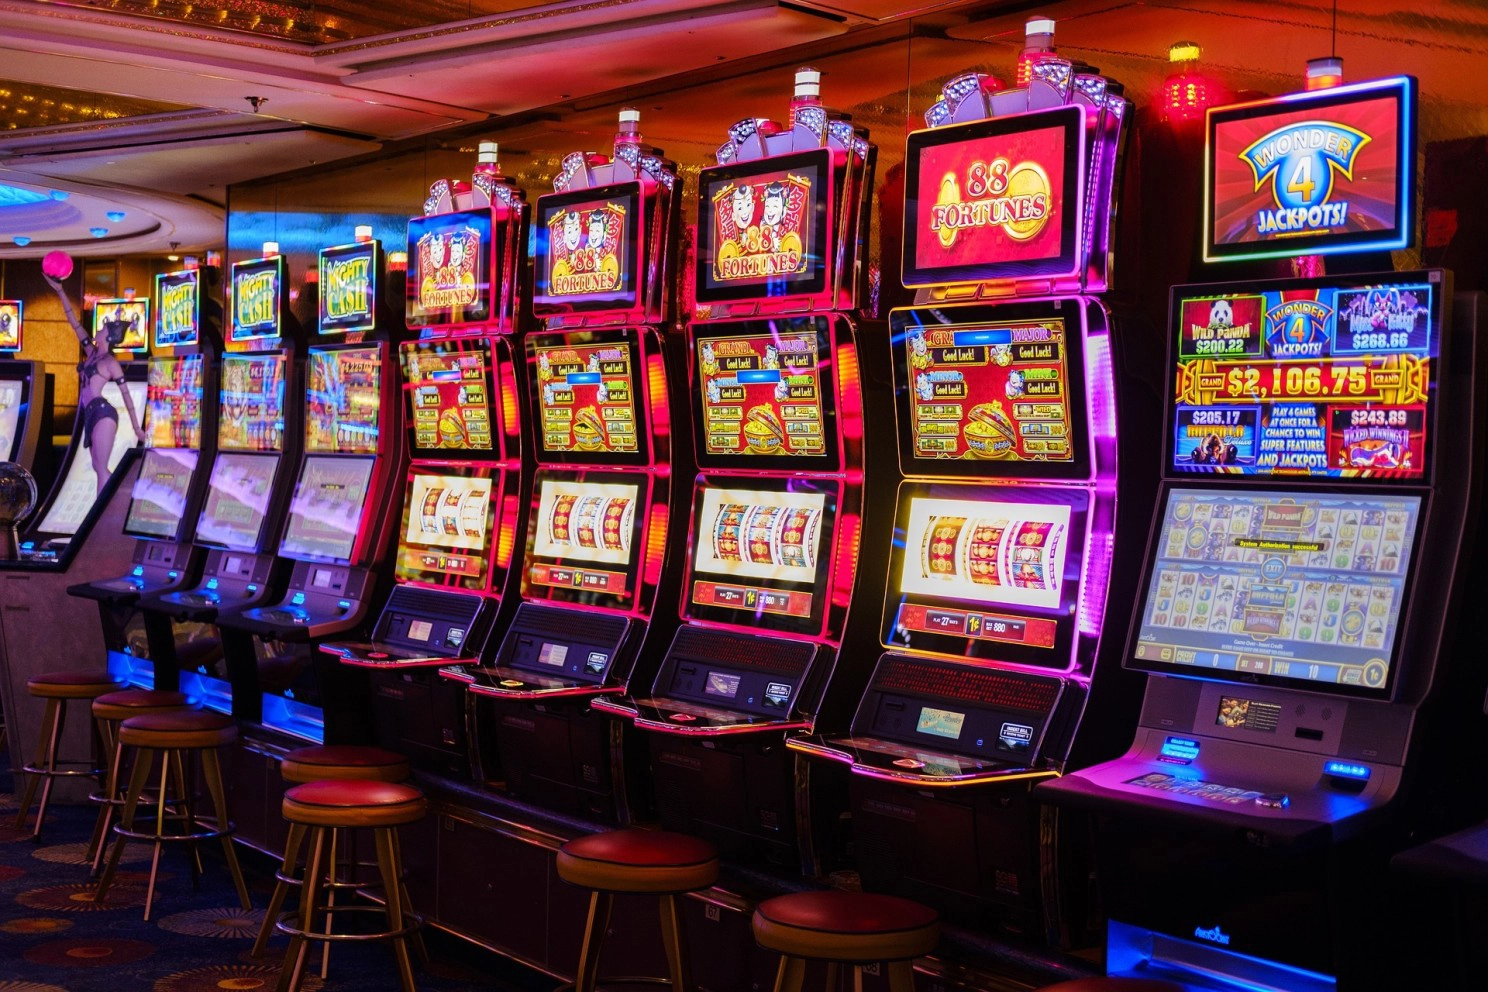 Advantages to using touchscreen monitors in the casino and gaming industry